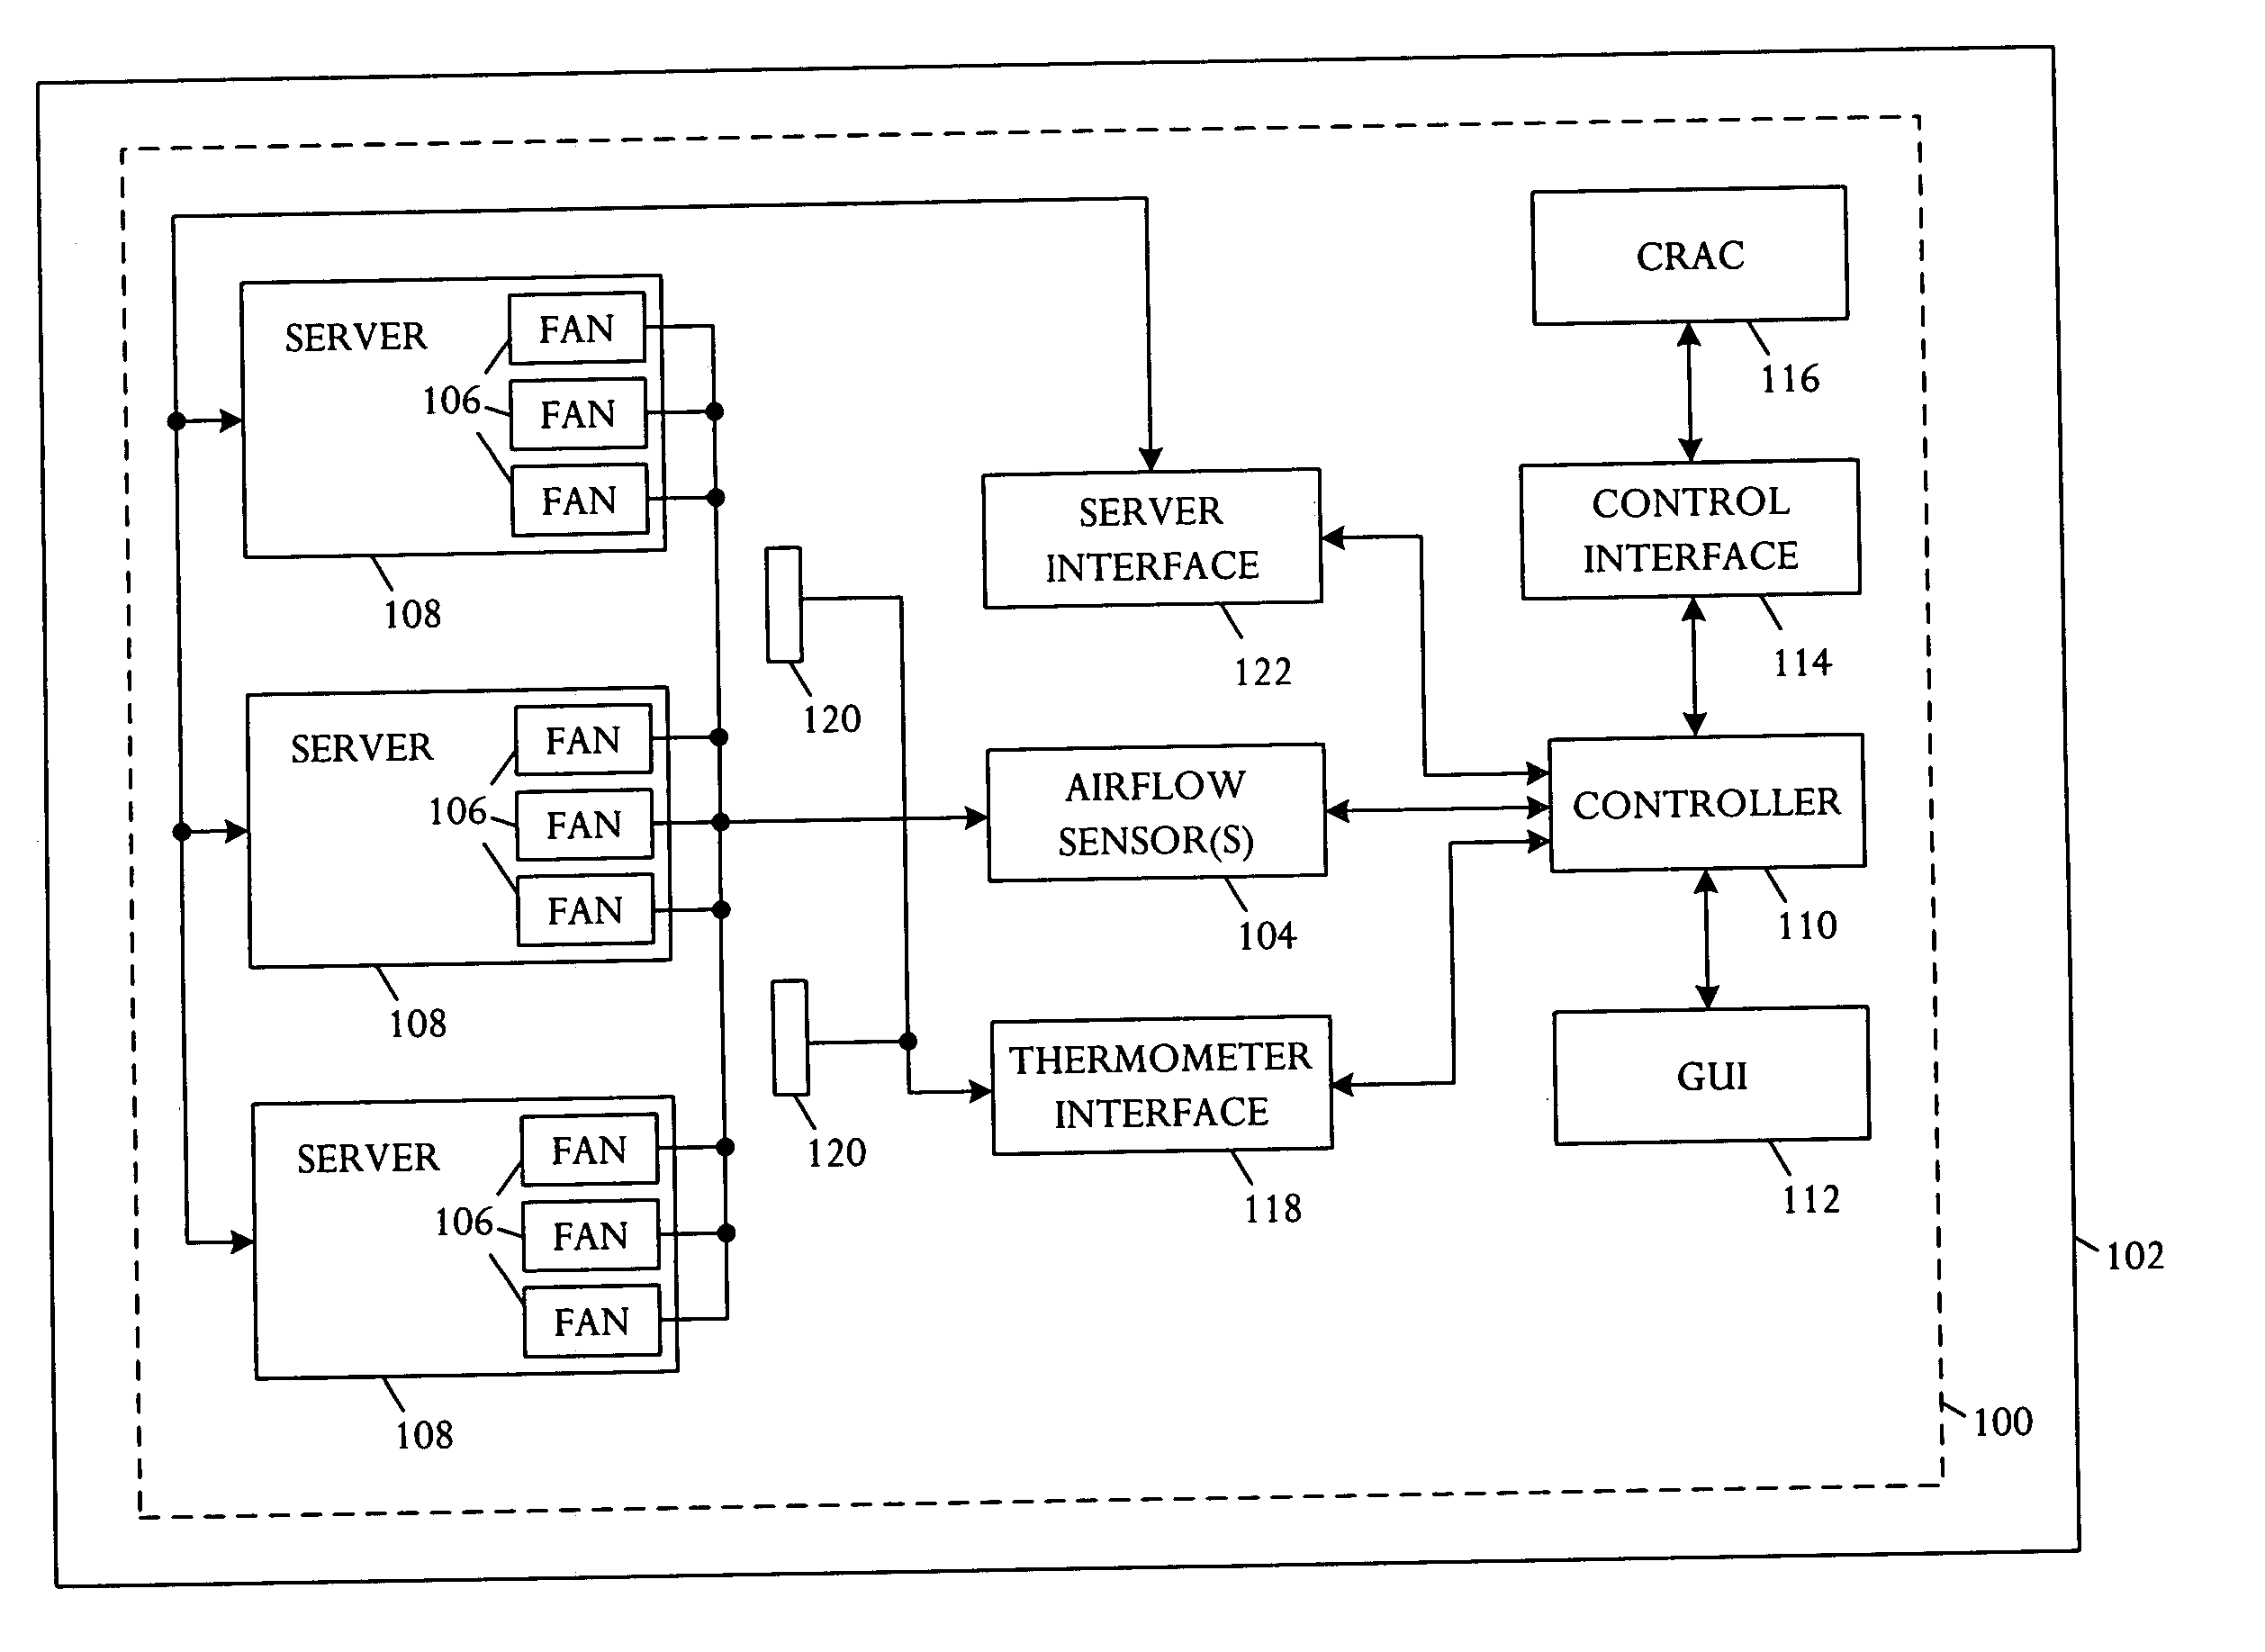 Thermal and power management apparatus